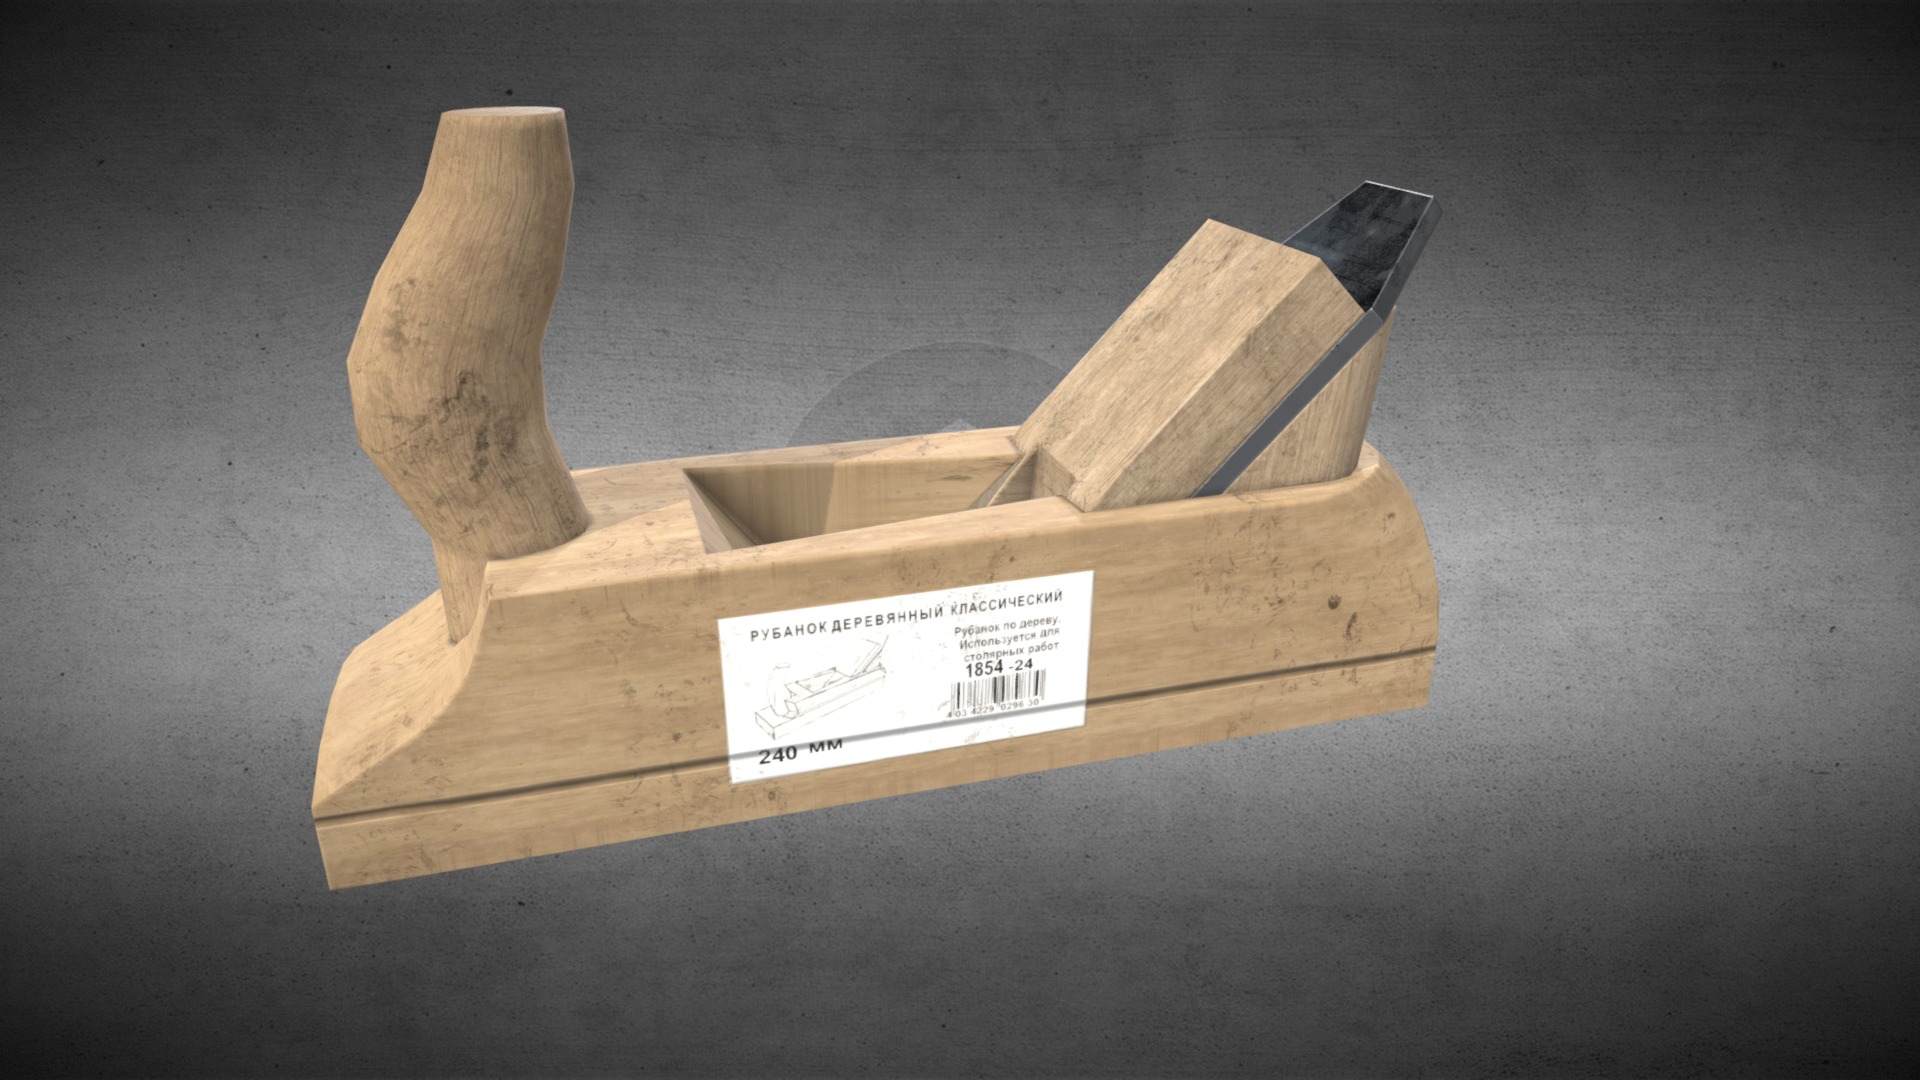 3D model planer - This is a 3D model of the planer. The 3D model is about a wooden block with a sign on it.